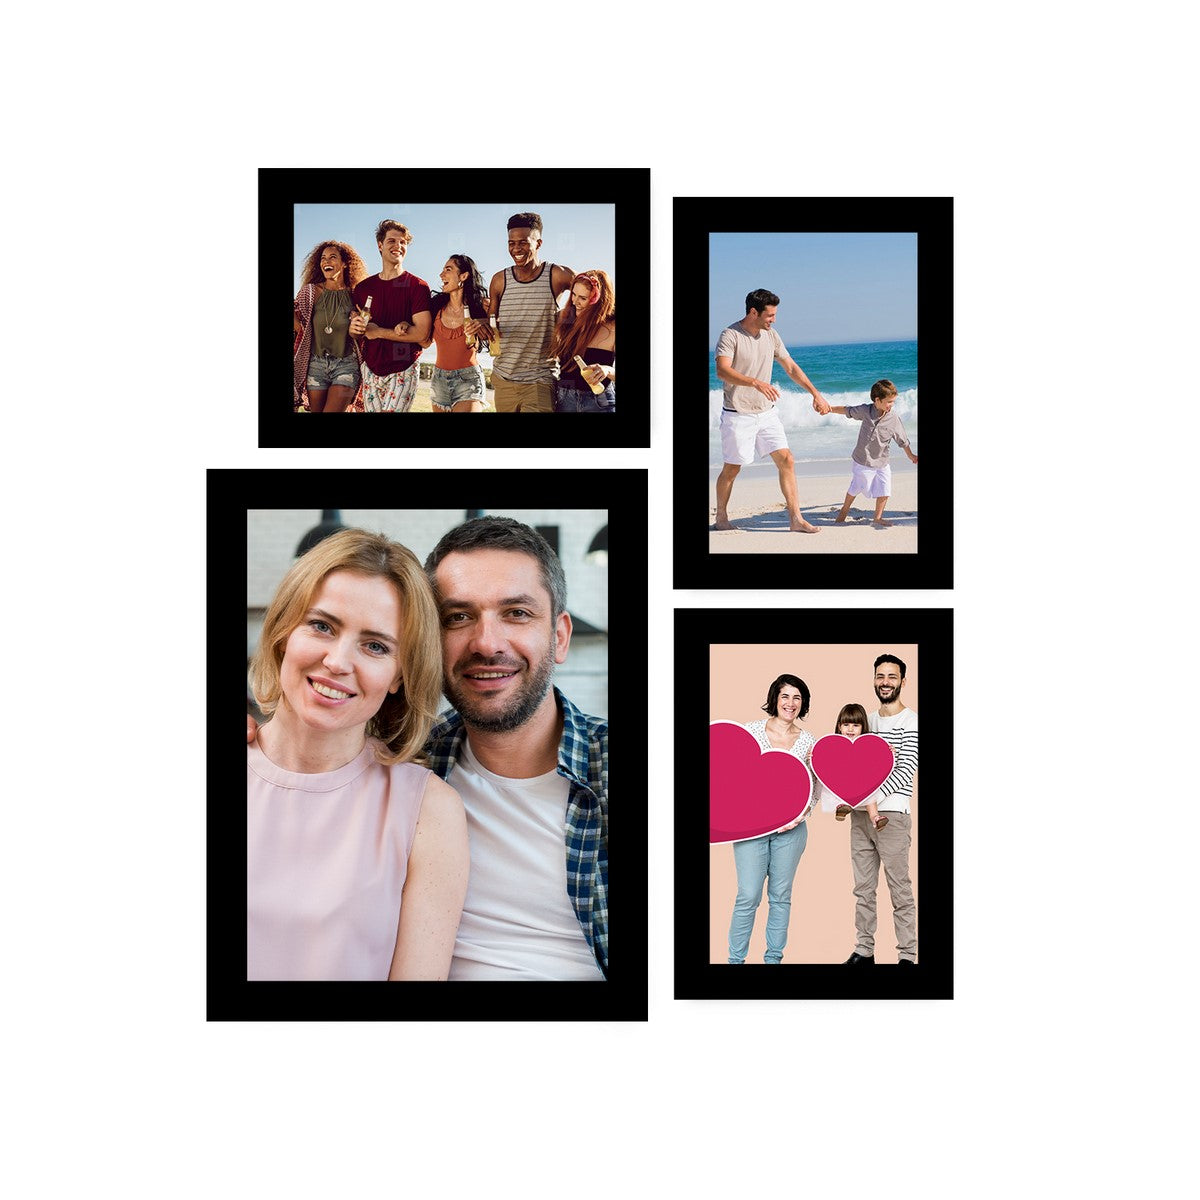 Memory Wall Collage Photo Frame - Set of 4 Photo Frames for 3 Photos of 5"x7" and 1 Photo of 8"x10"